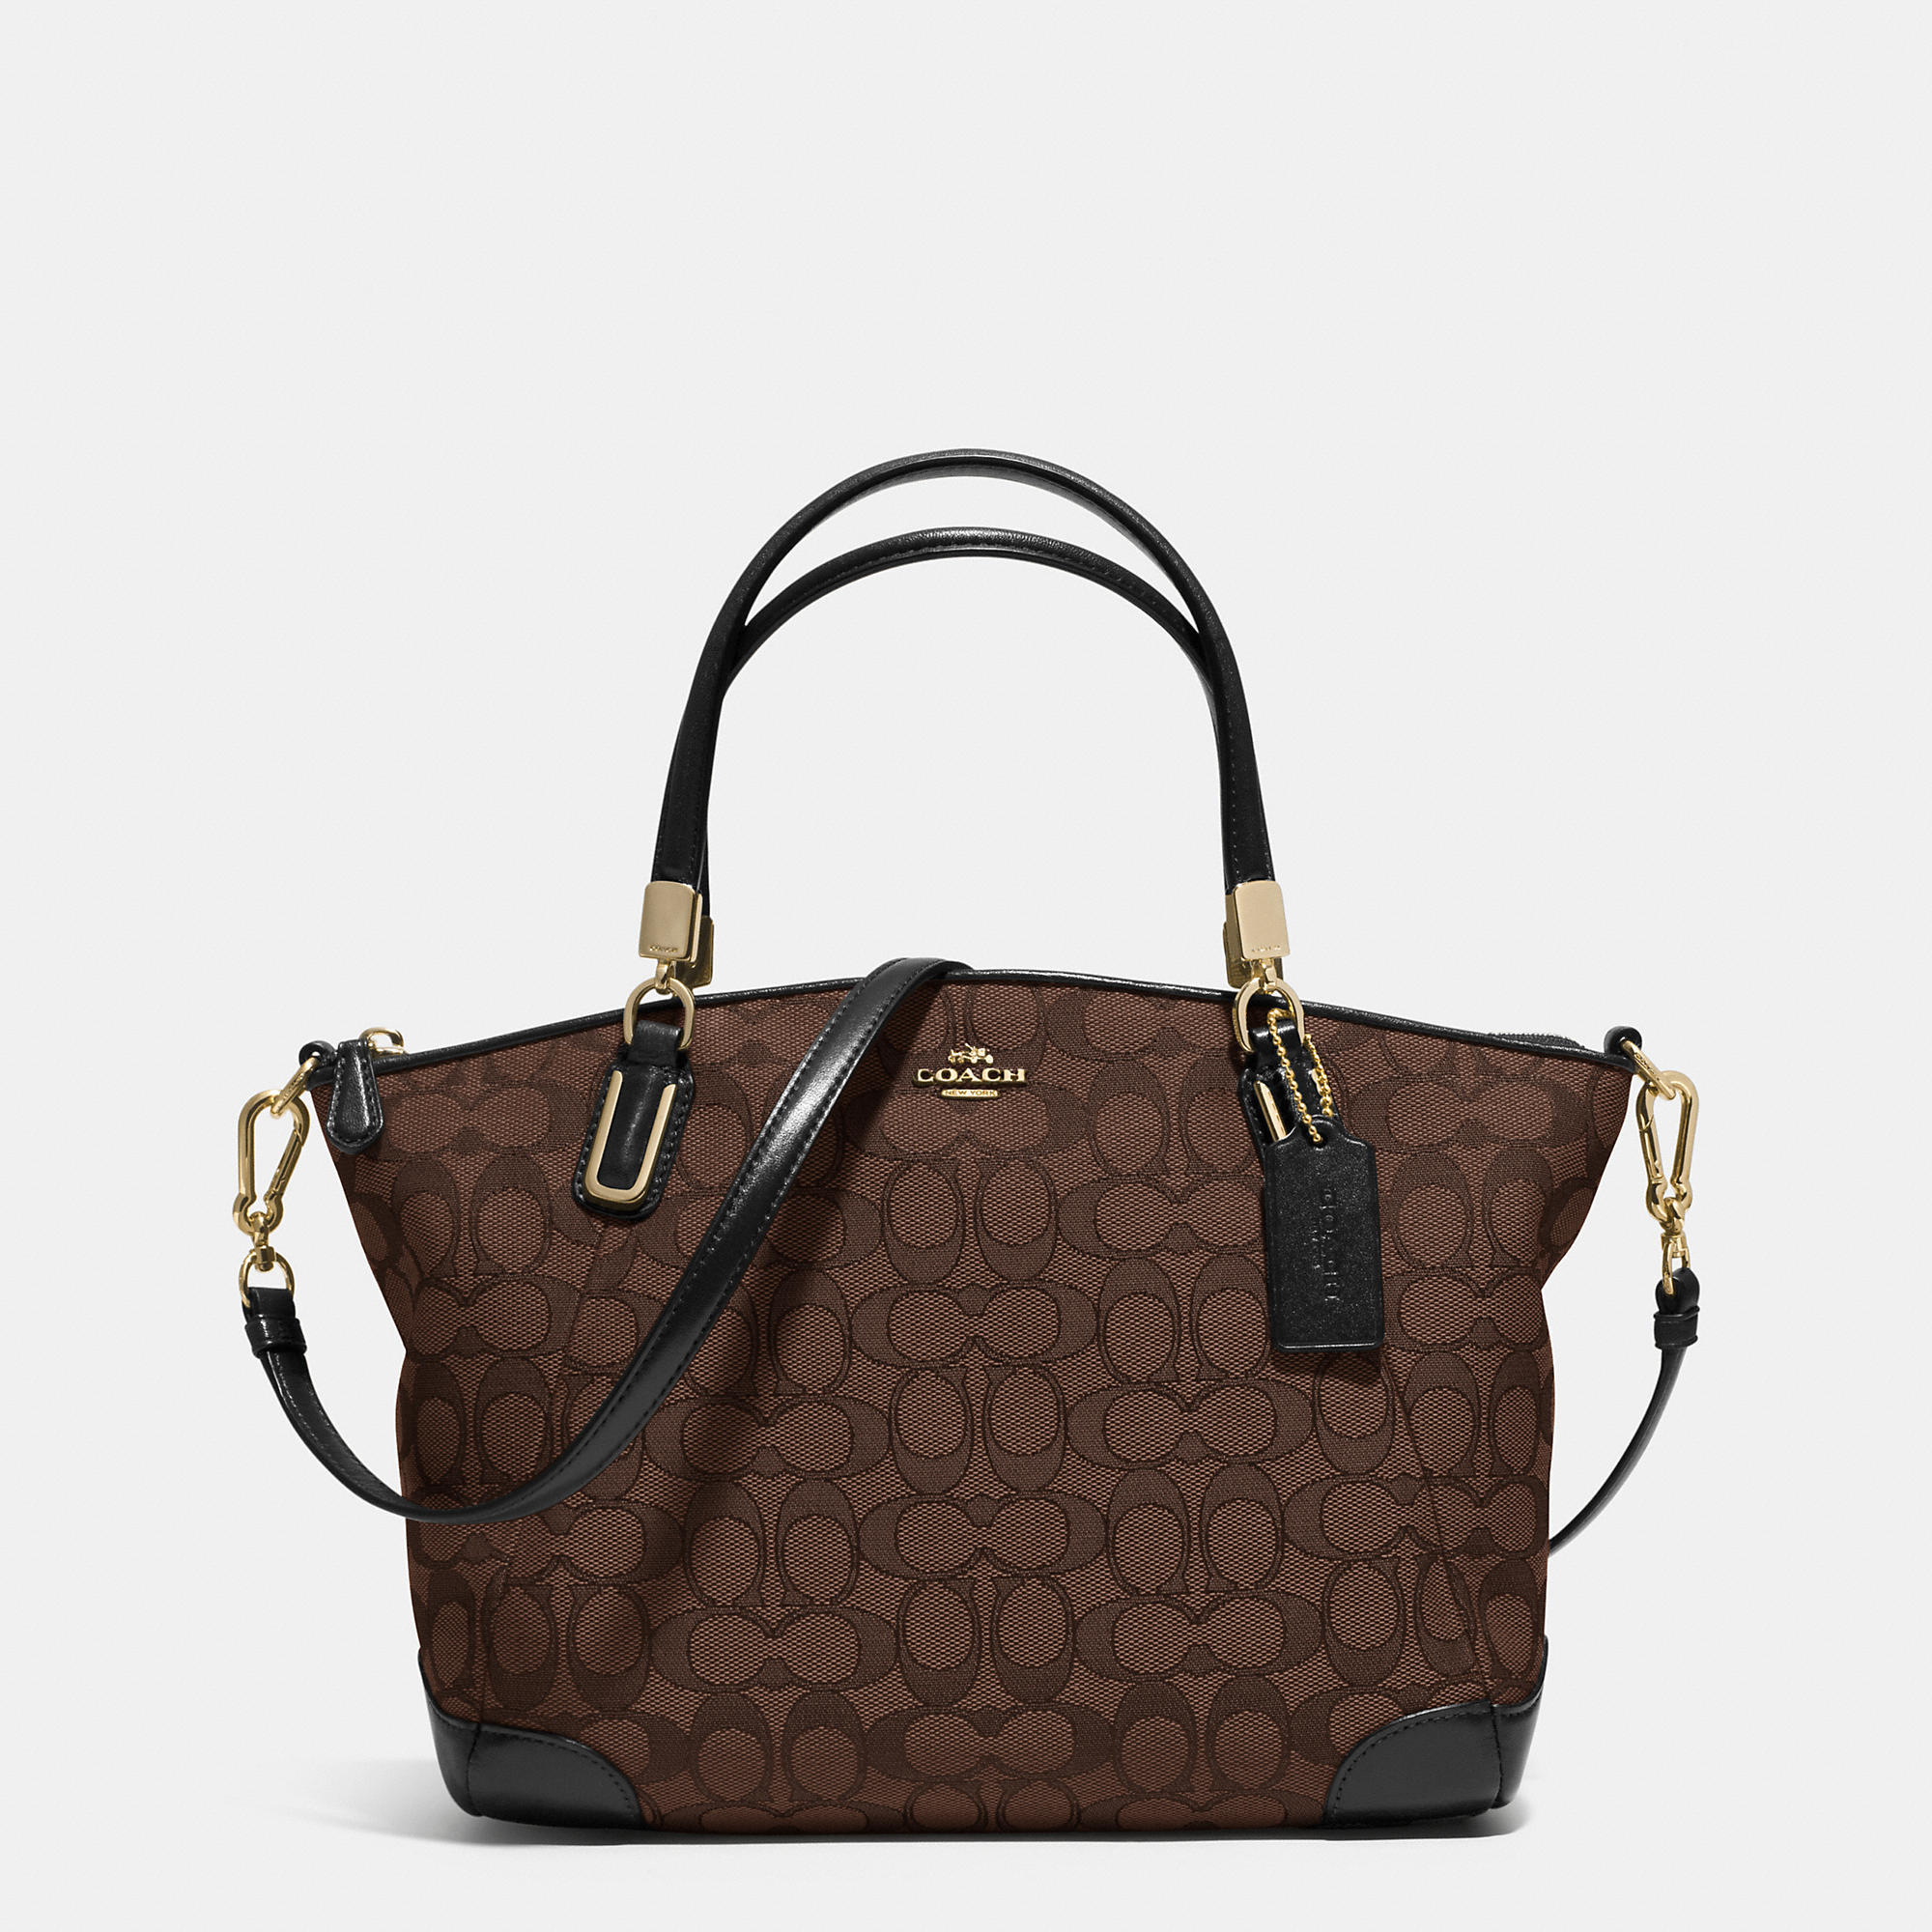 COACH Small Kelsey Crossbody In Signature Jacquard in Light Gold/Brown/Black (Metallic) - Lyst